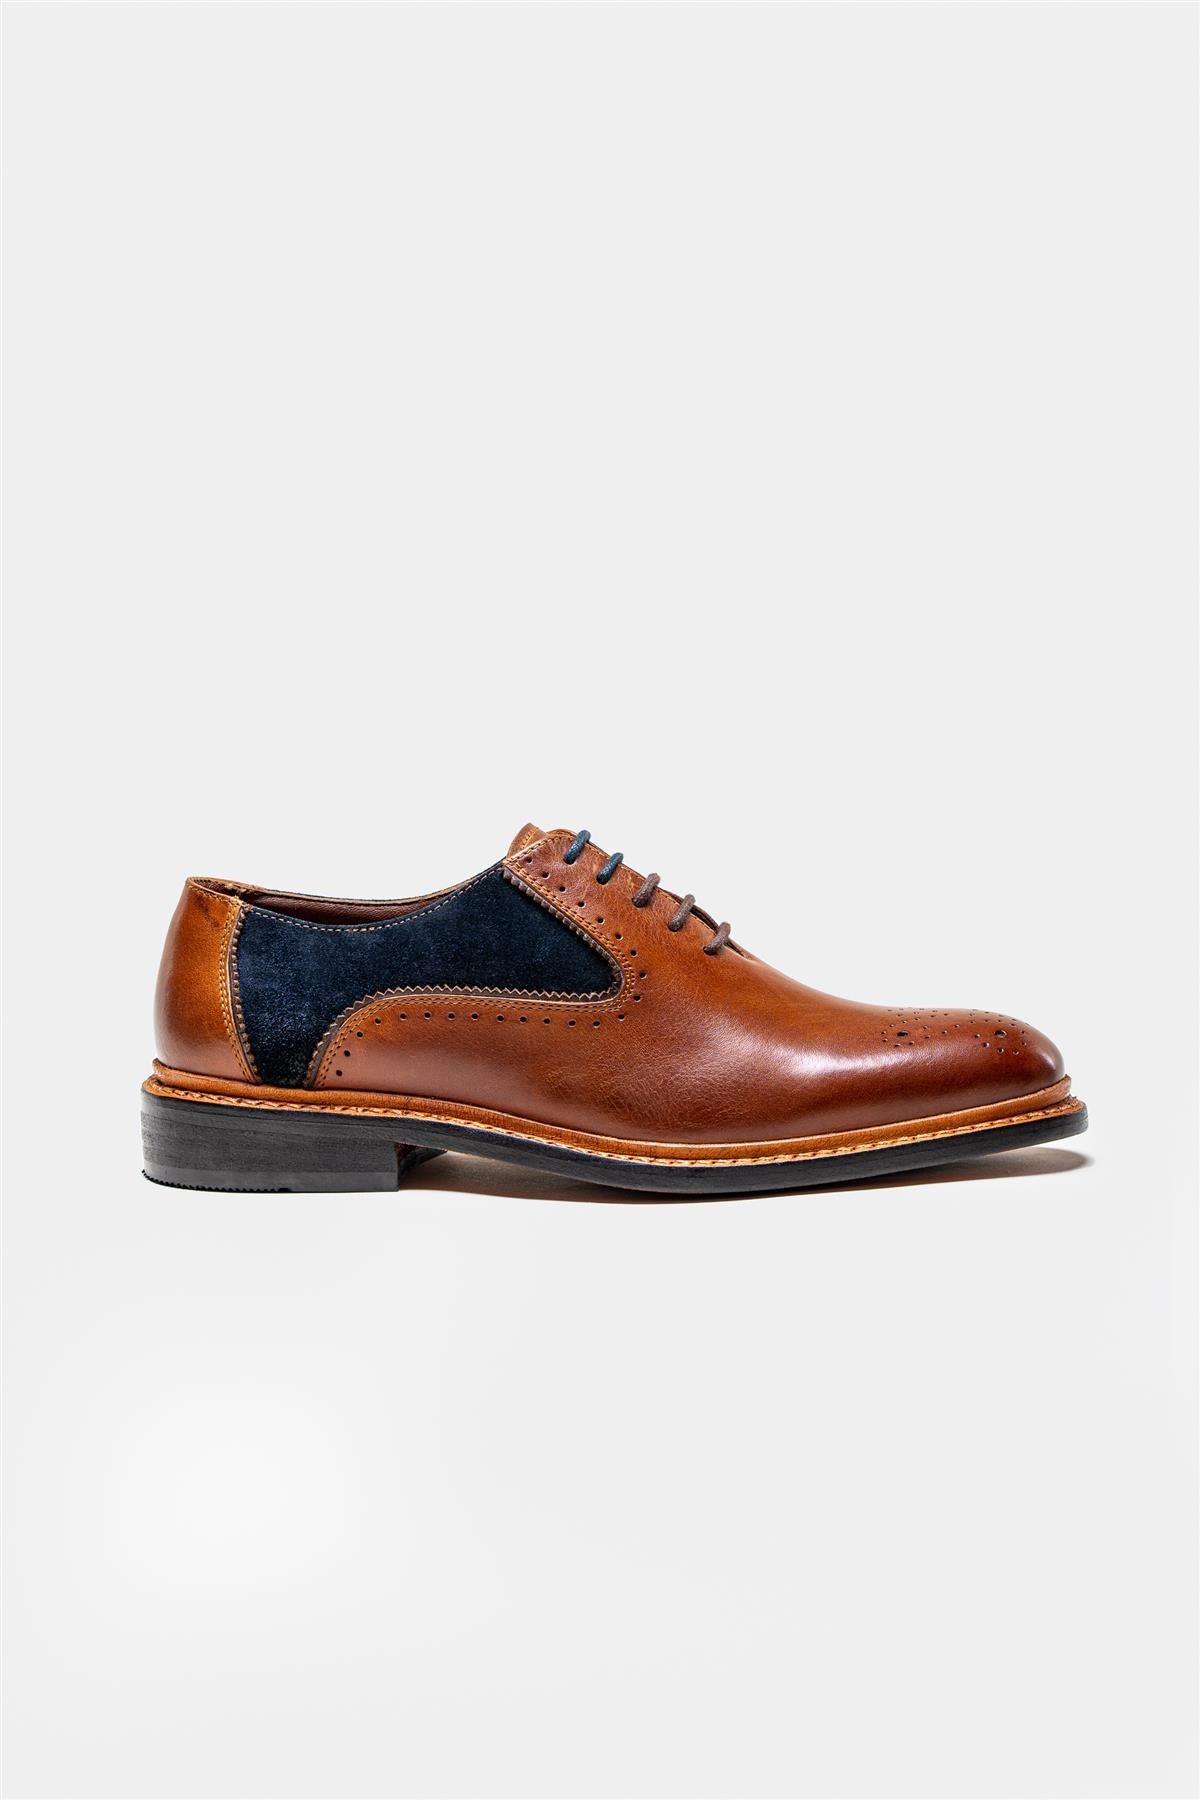 Brentwood tan/navy shoes side